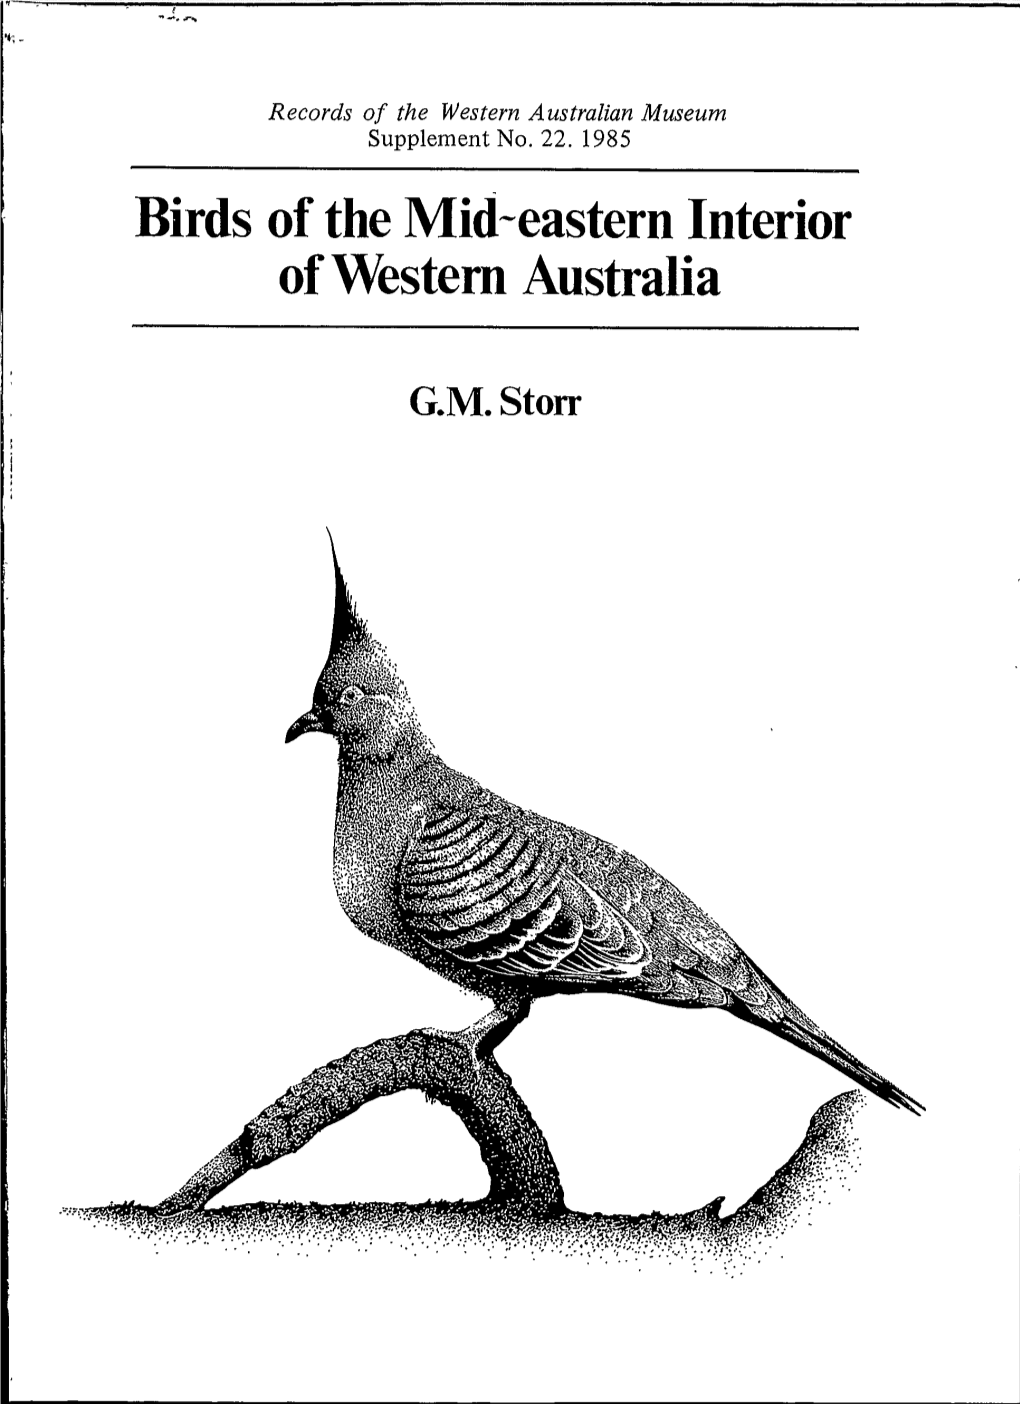 Birds of the Mid-Eastern Interior of Western Australia Download 3.49 MB